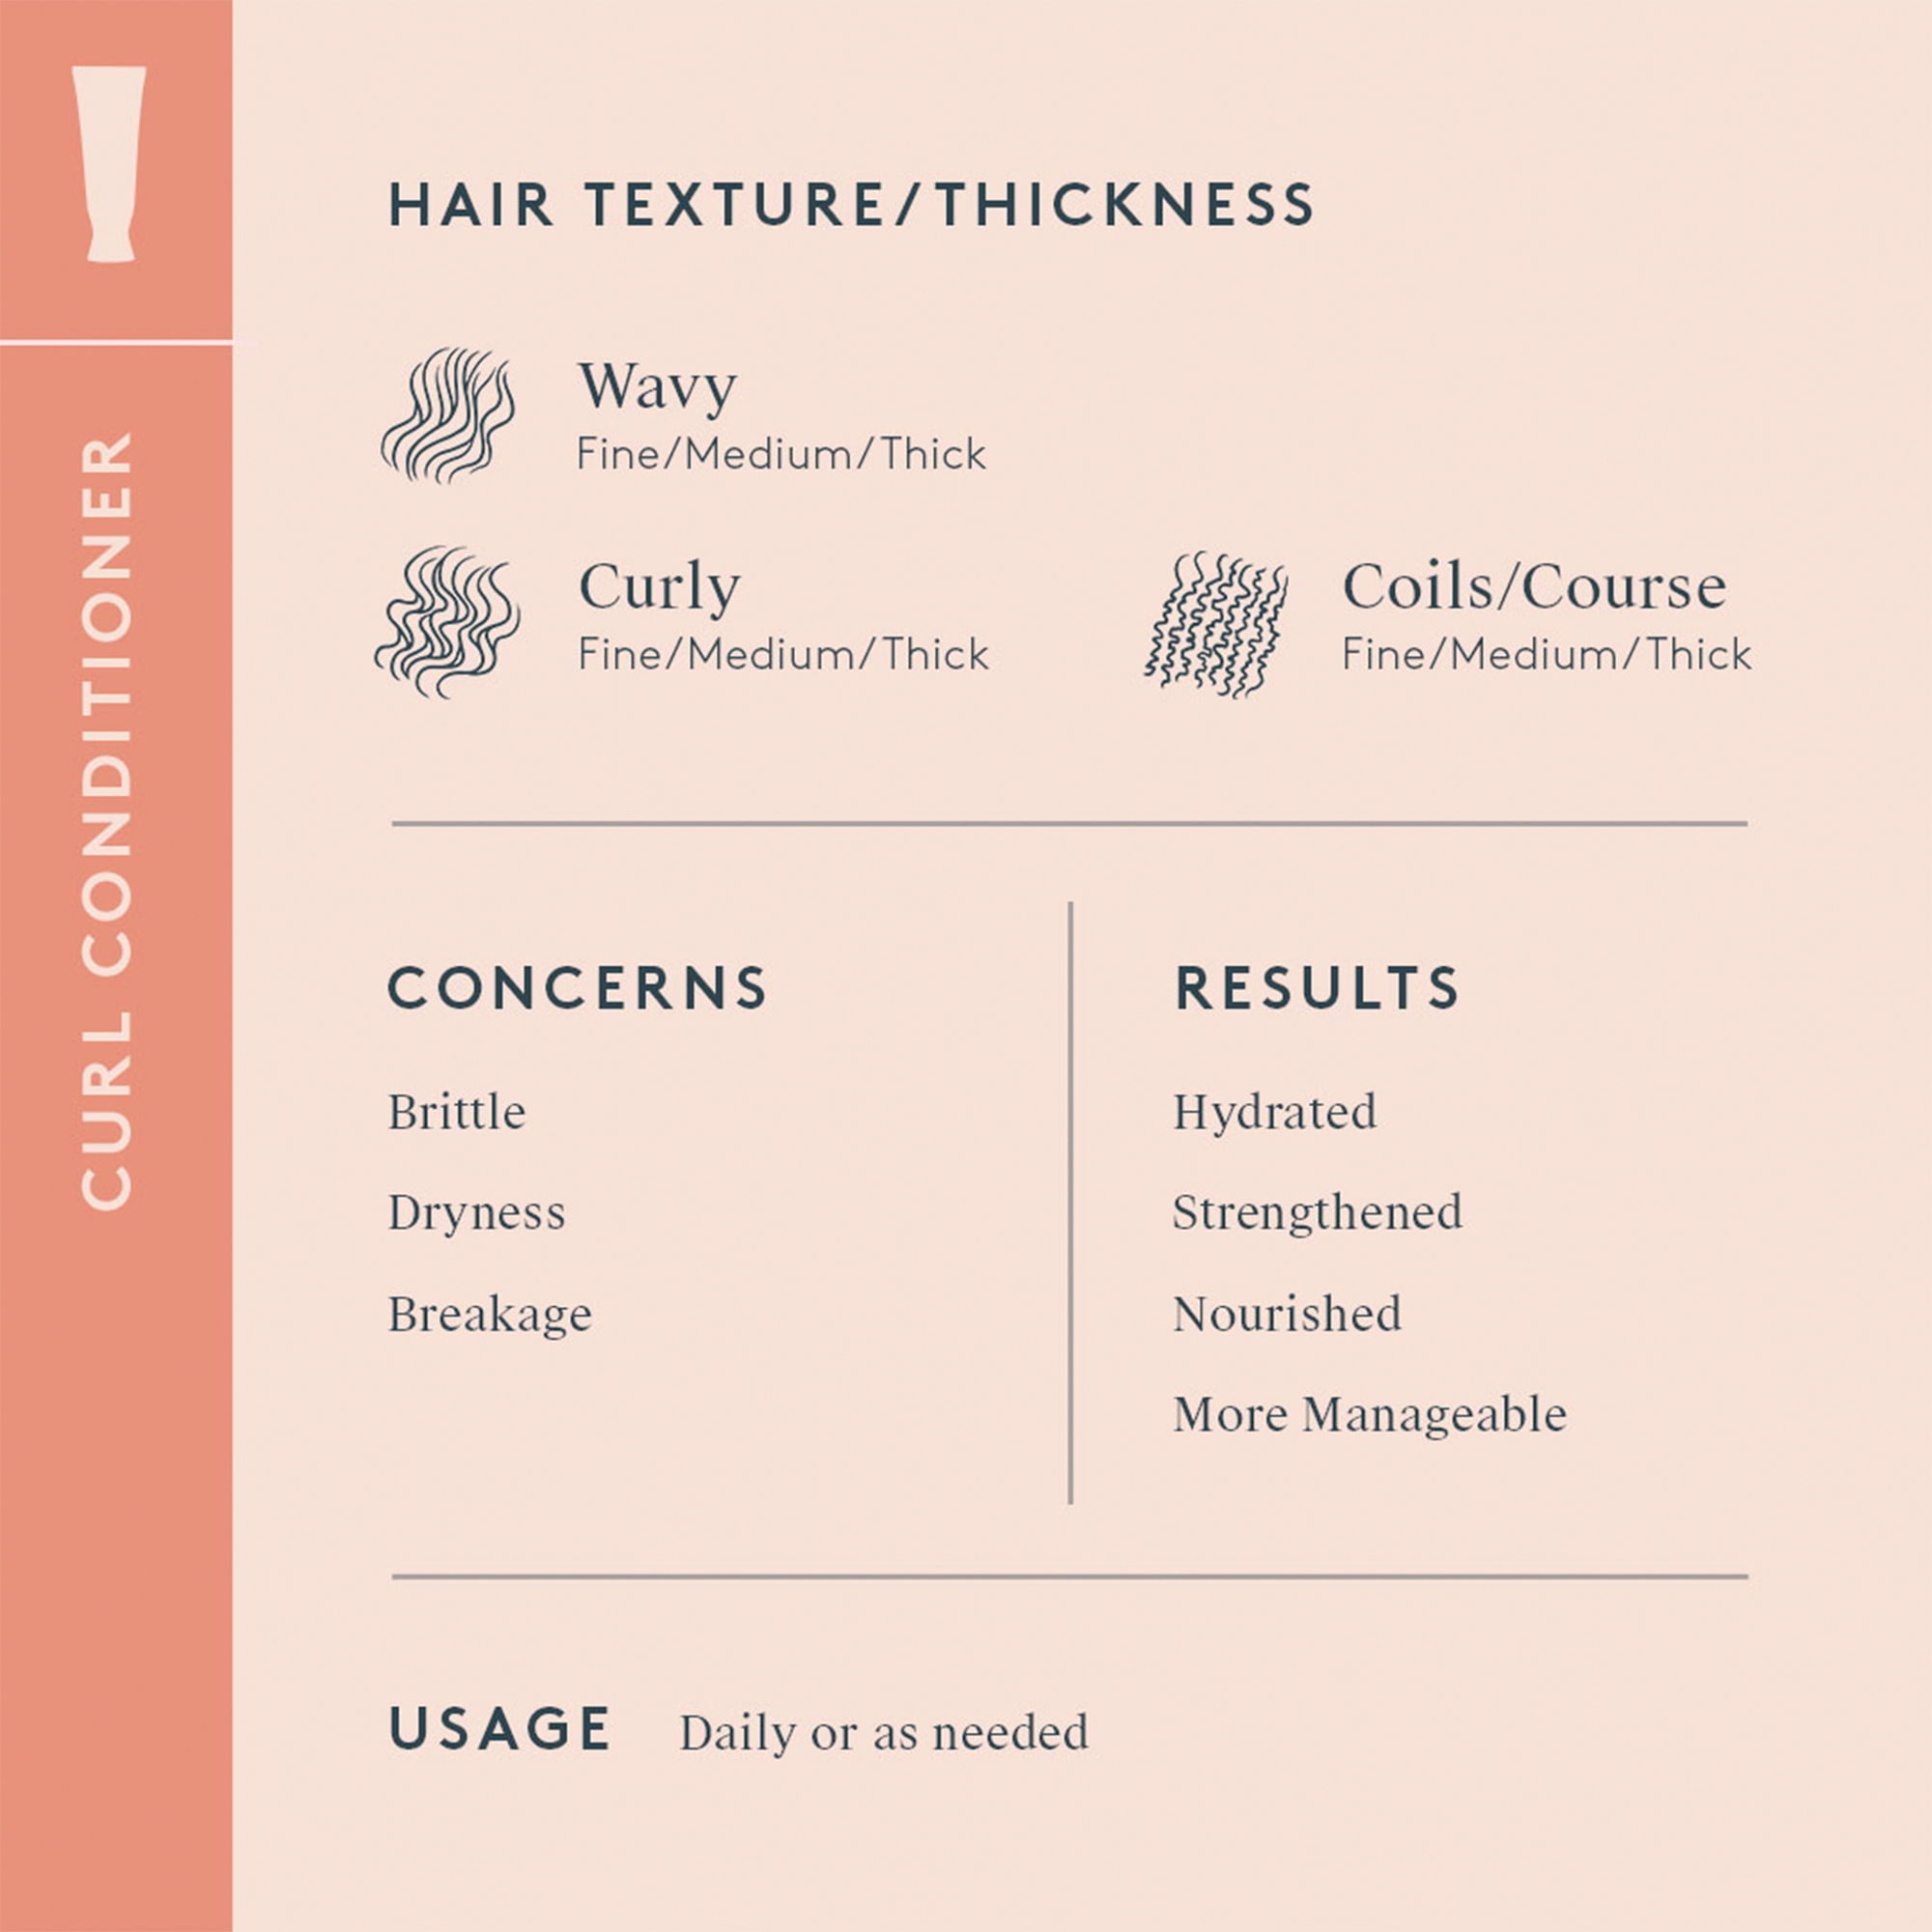 Conditioner Hair thickness and texture,Concerns, results,usage chart